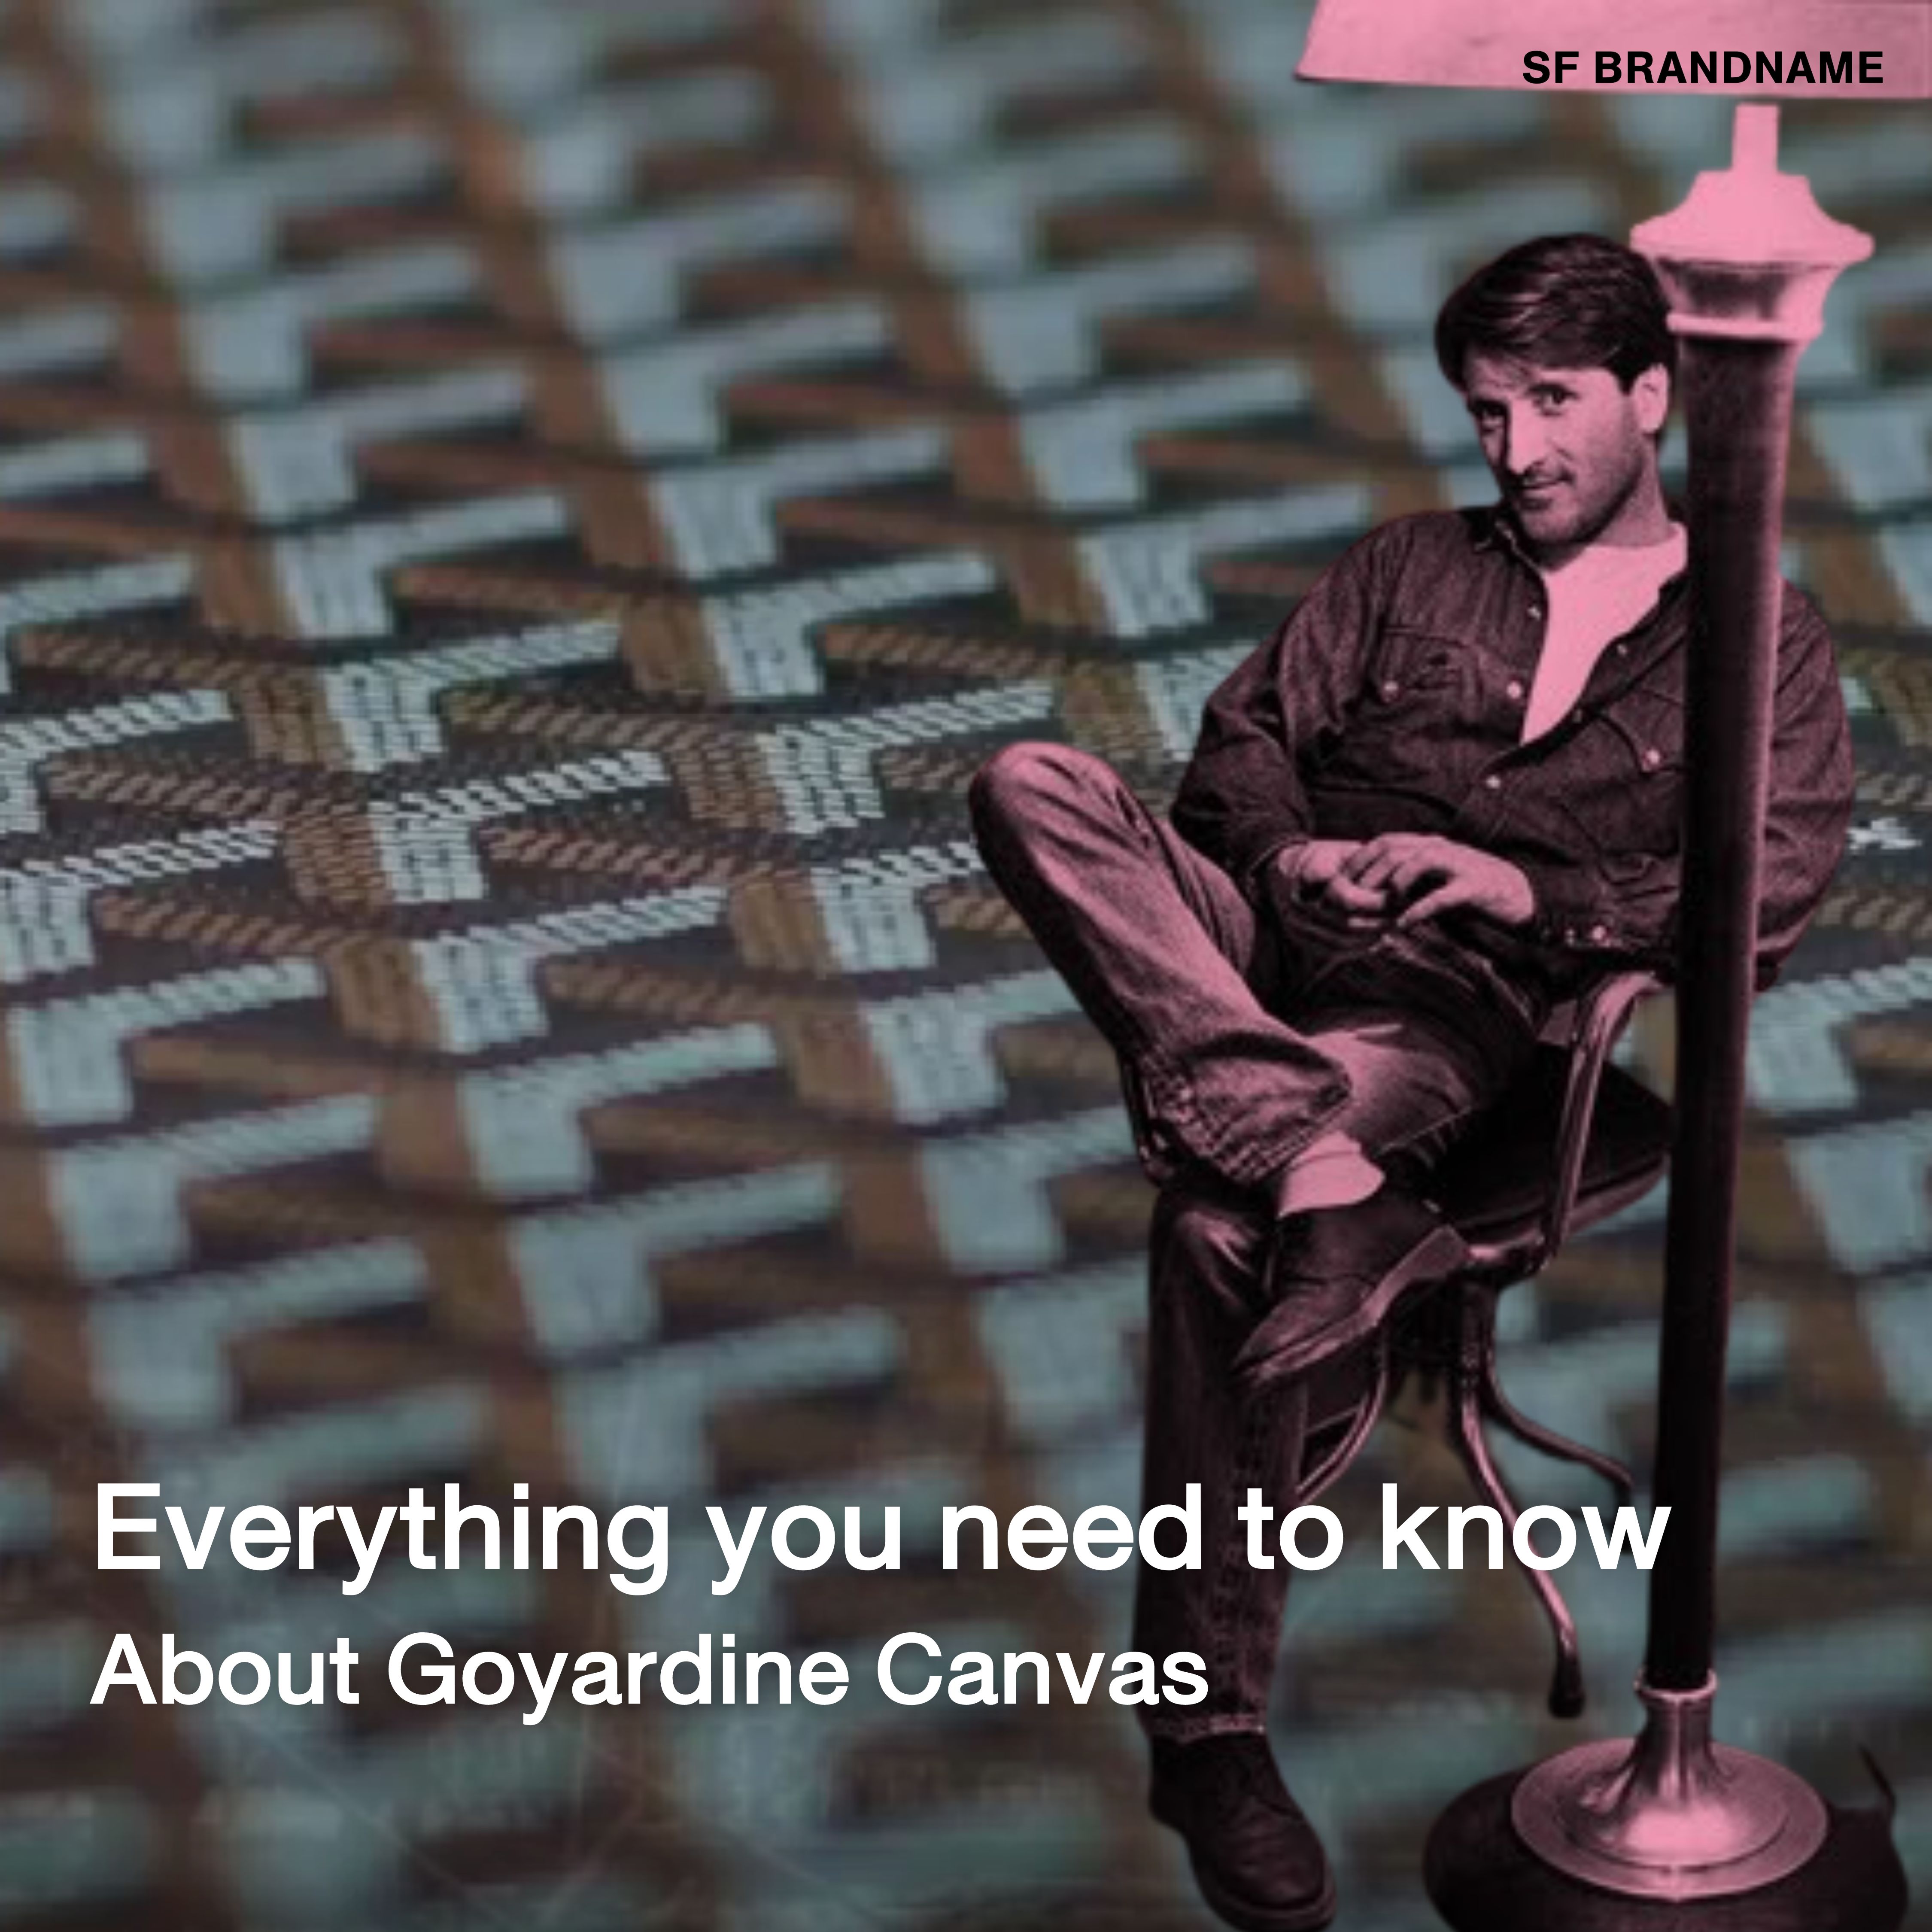 Everything you need to know about Goyardine canvas